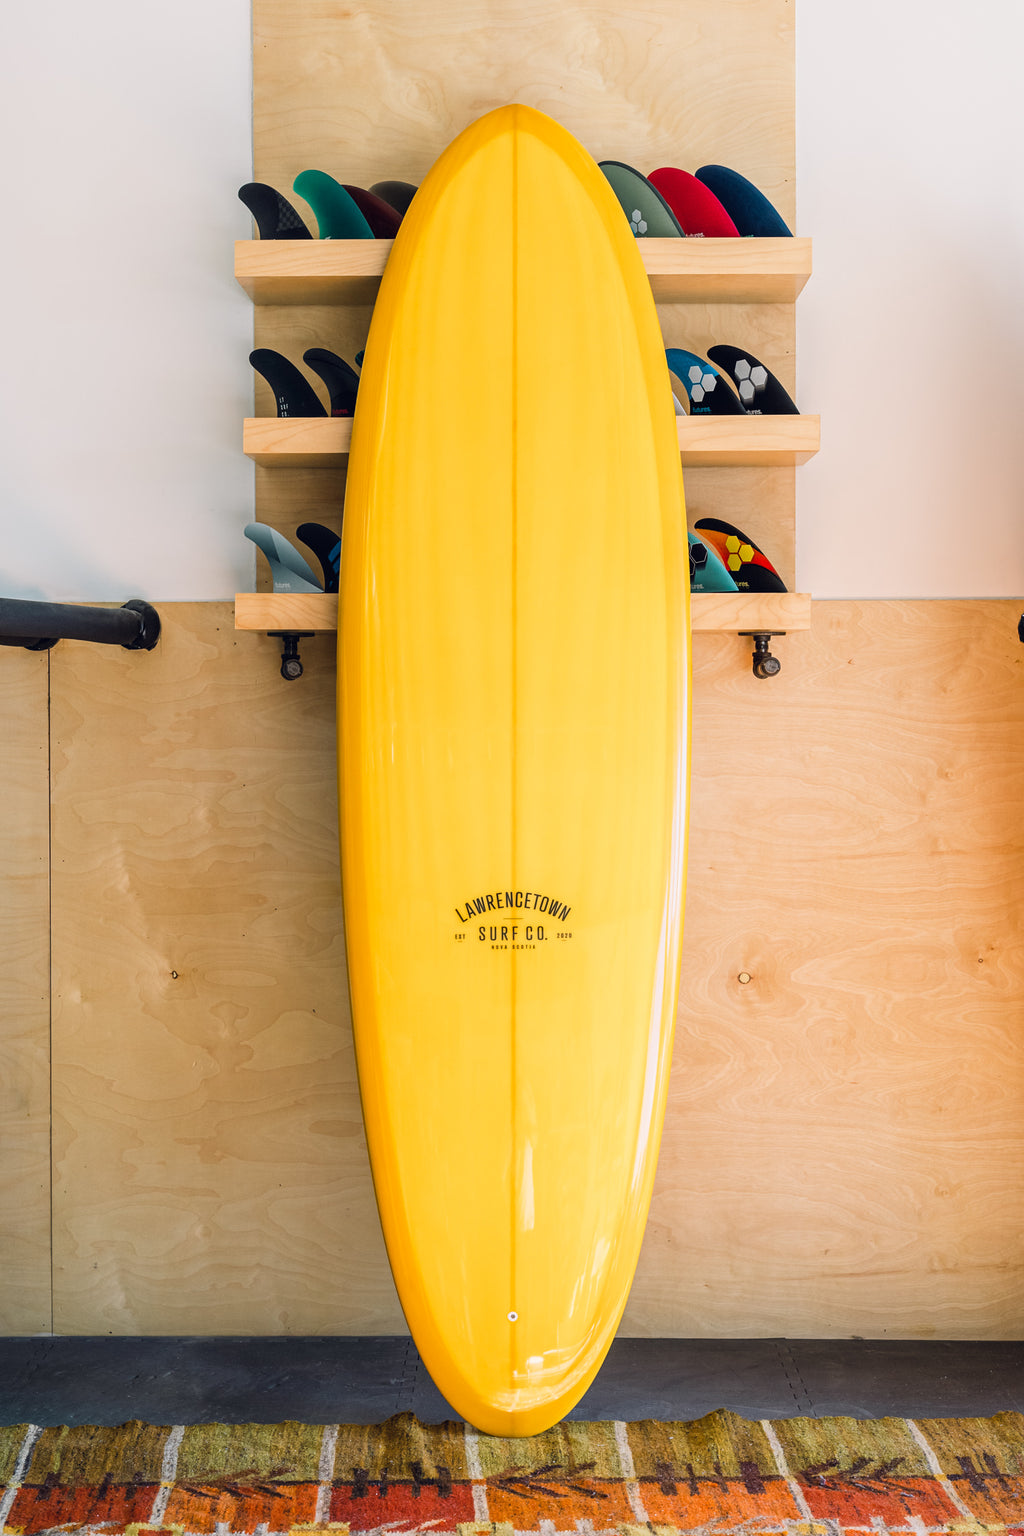 Lawrencetown Surf Co. - 6'10" Classic Egg